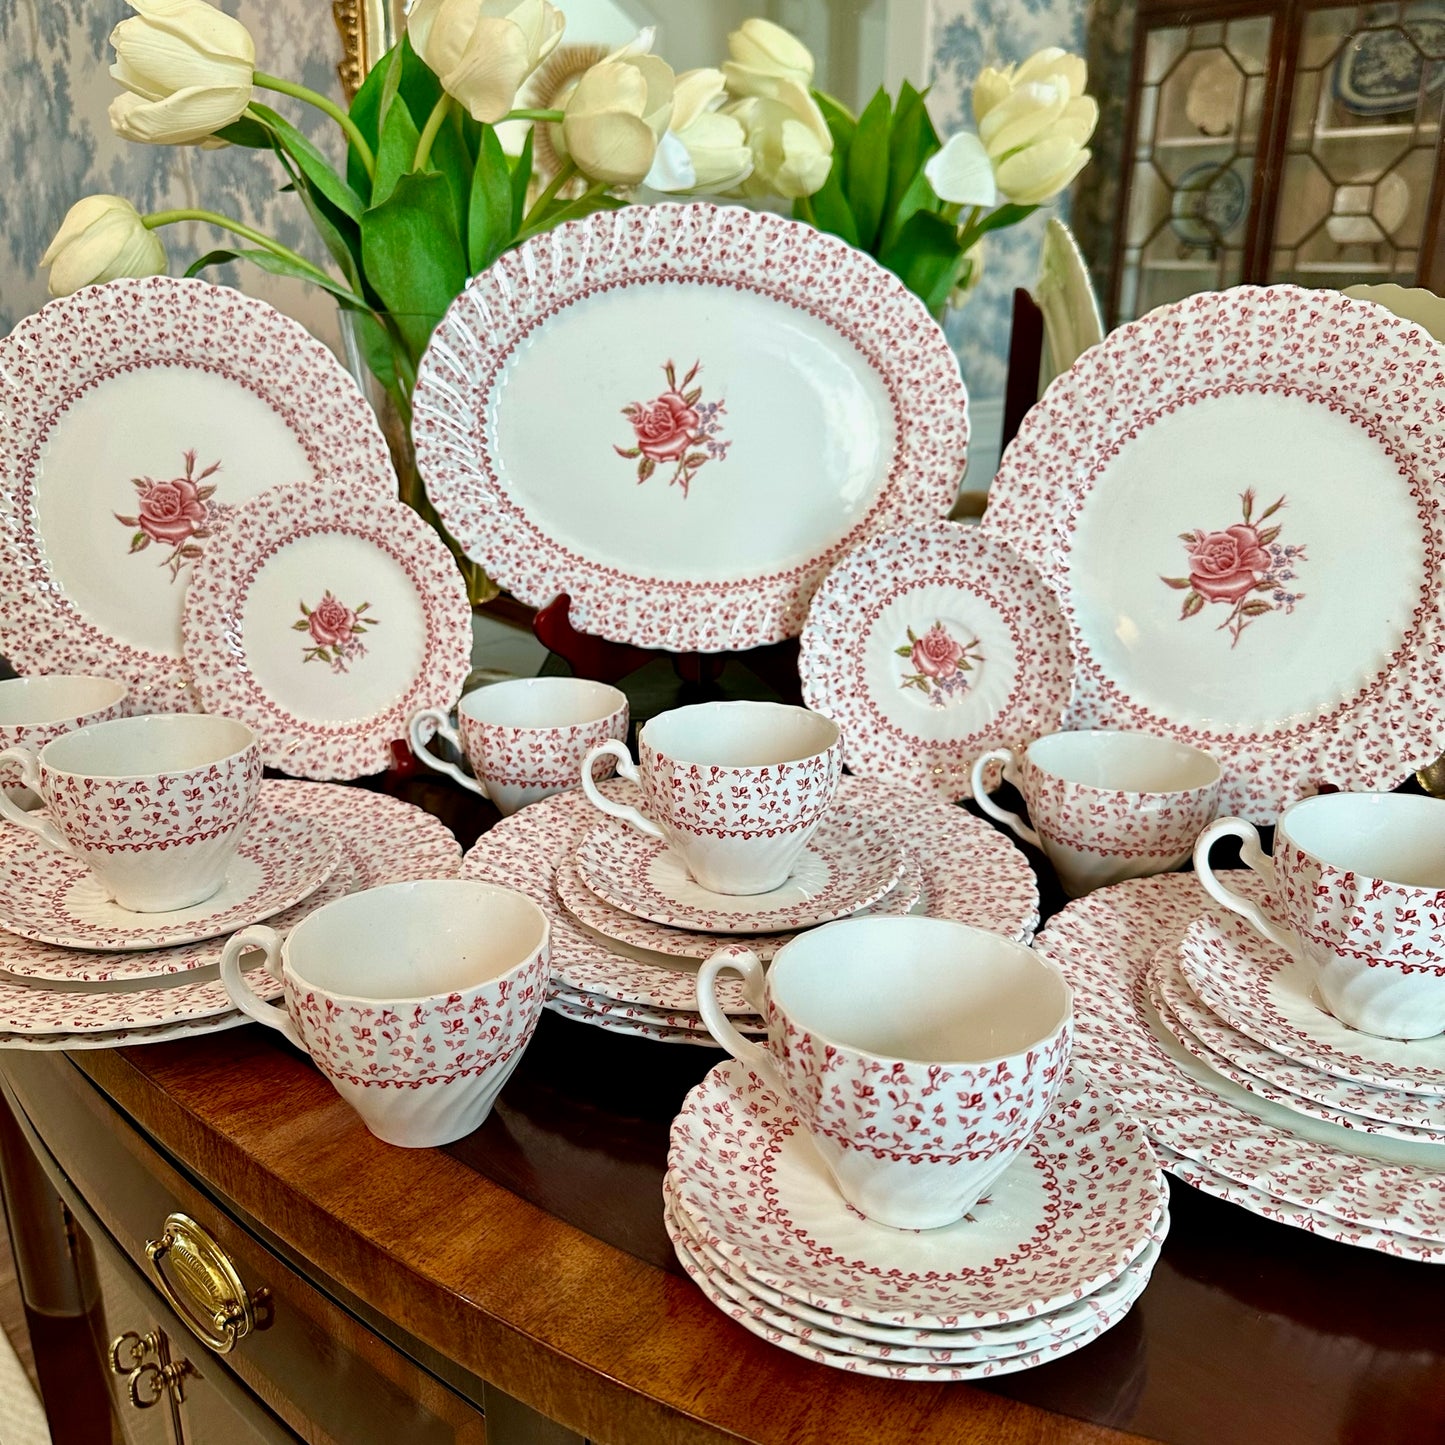 Prettiest Set of “Rose Bouquet” dishes by Johnson Bros